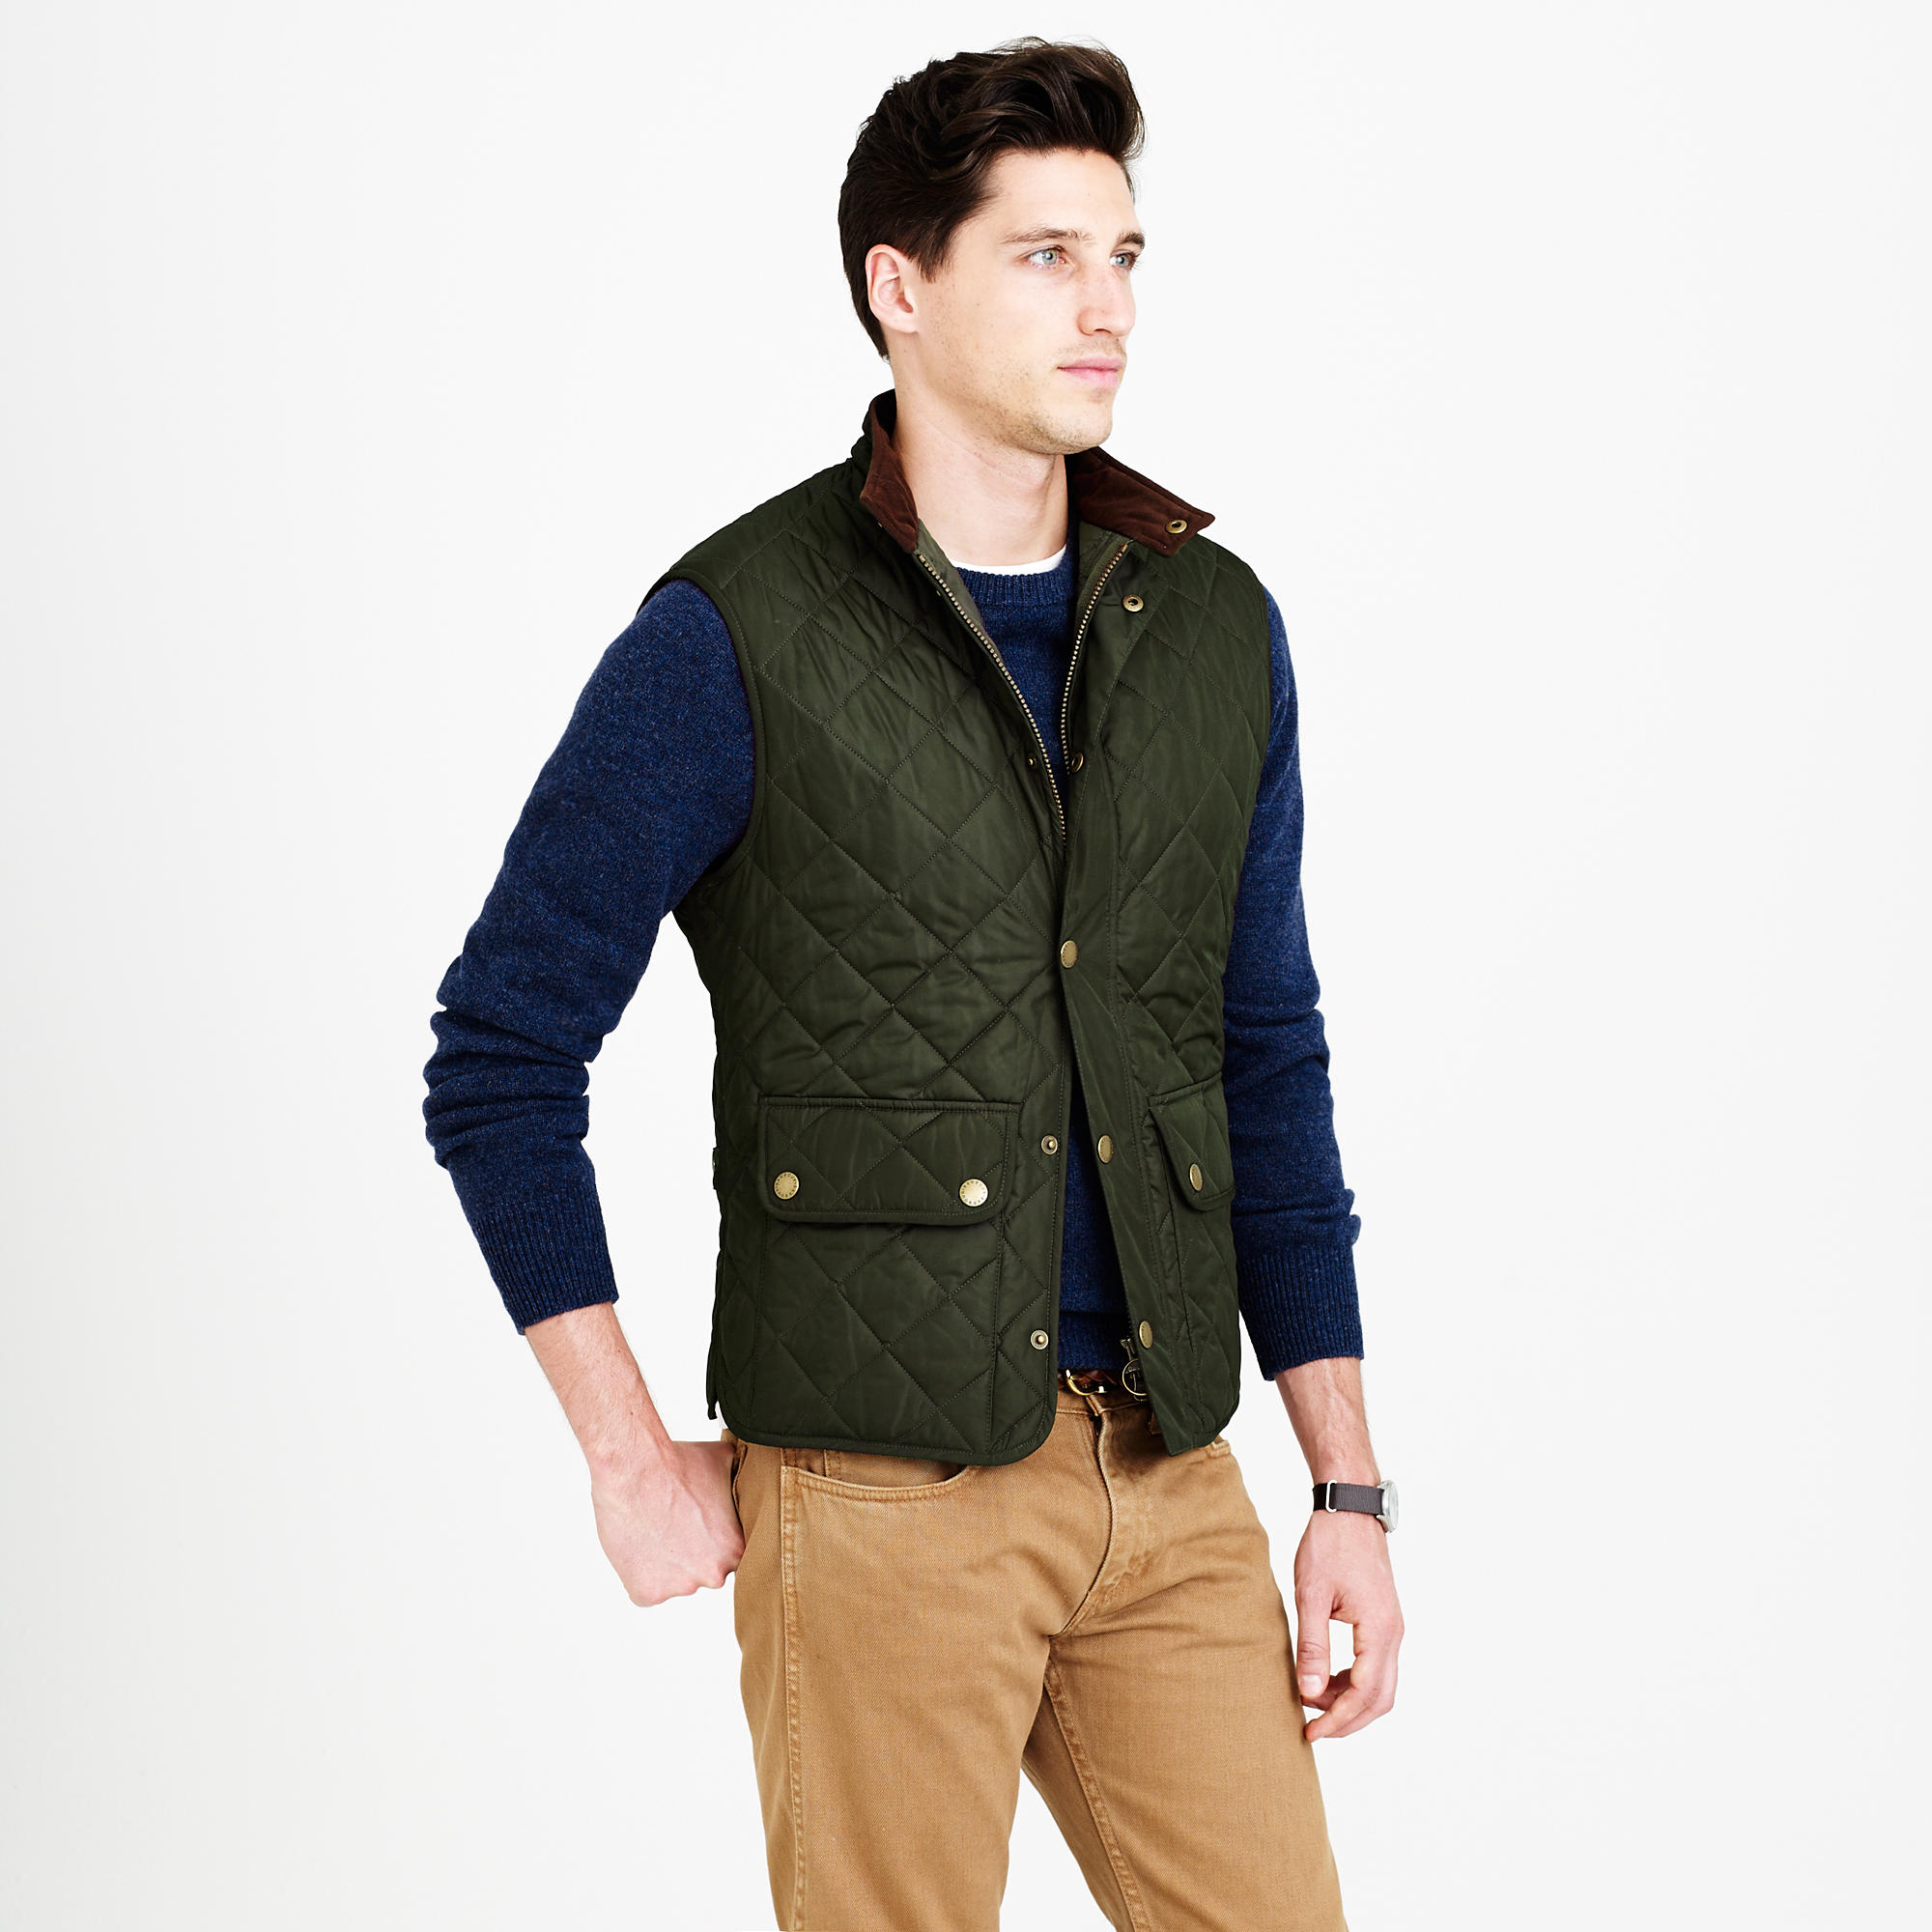 Lyst - J.Crew Barbour Lowerdale Quilted Vest in Green for Men